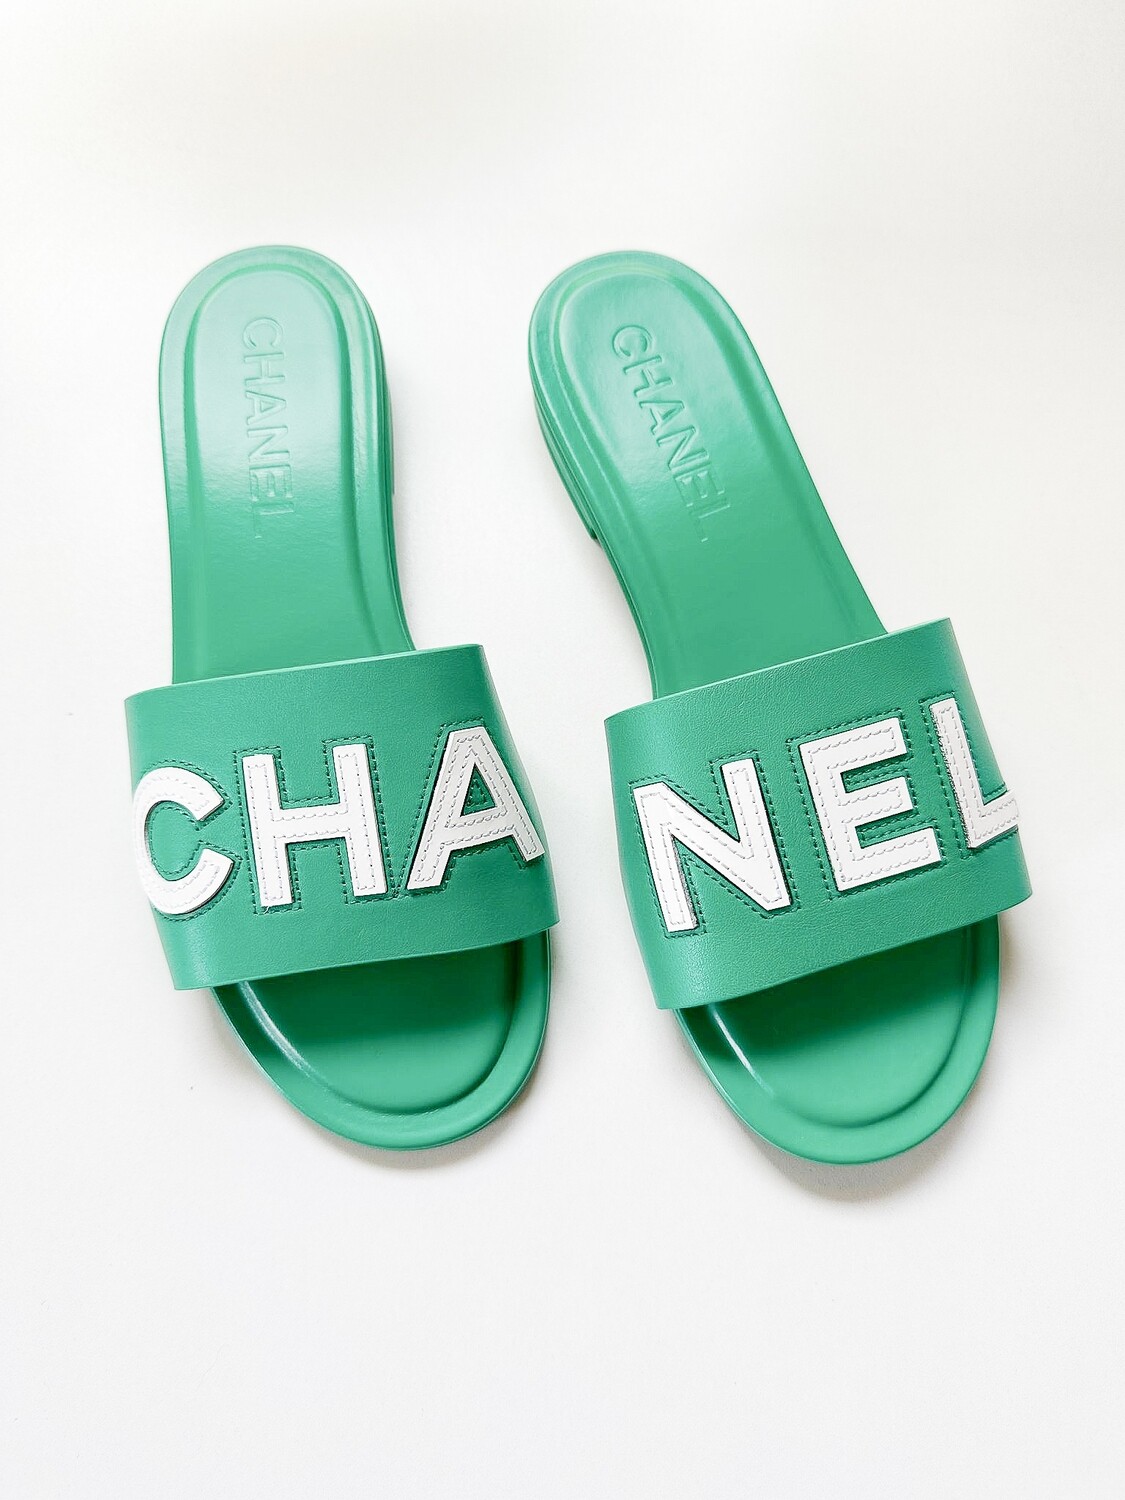 Chanel Slide Sandals, Green and White, Size 38, New in Box GA003